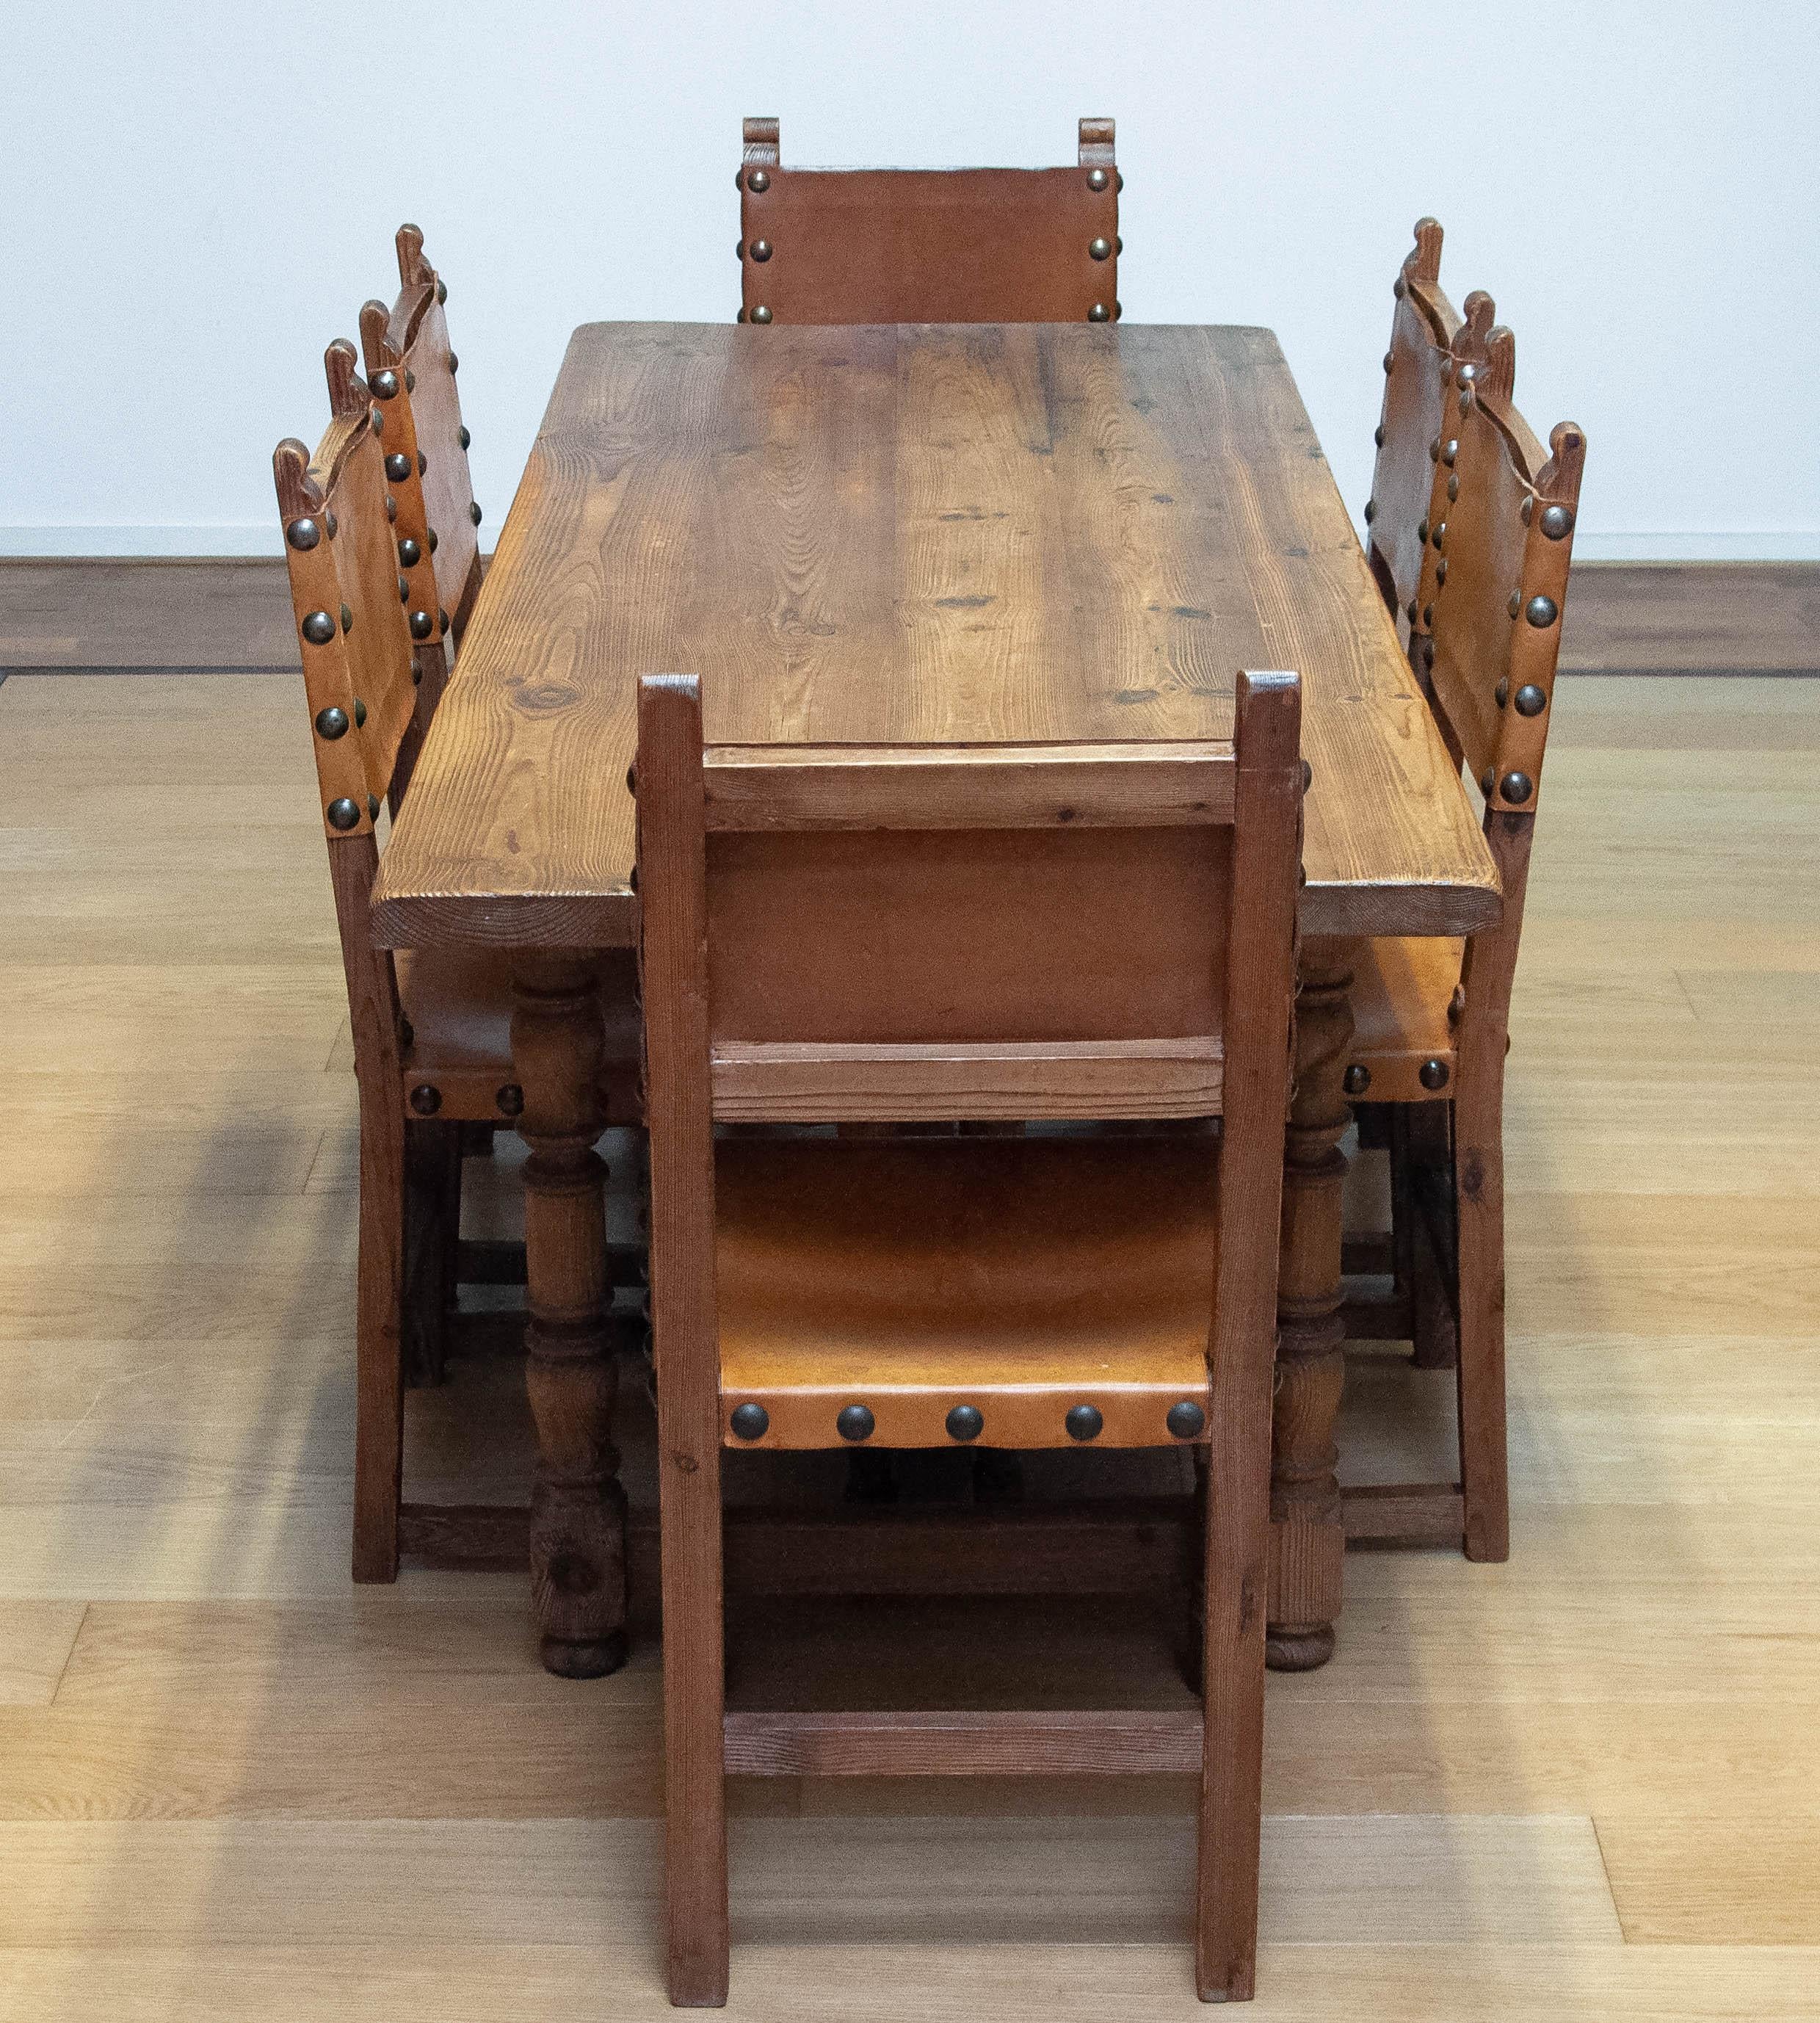 Antique Swedish Folk Art Farm County Dining Table In Pine. Six Chairs In Leather In Good Condition For Sale In Silvolde, Gelderland